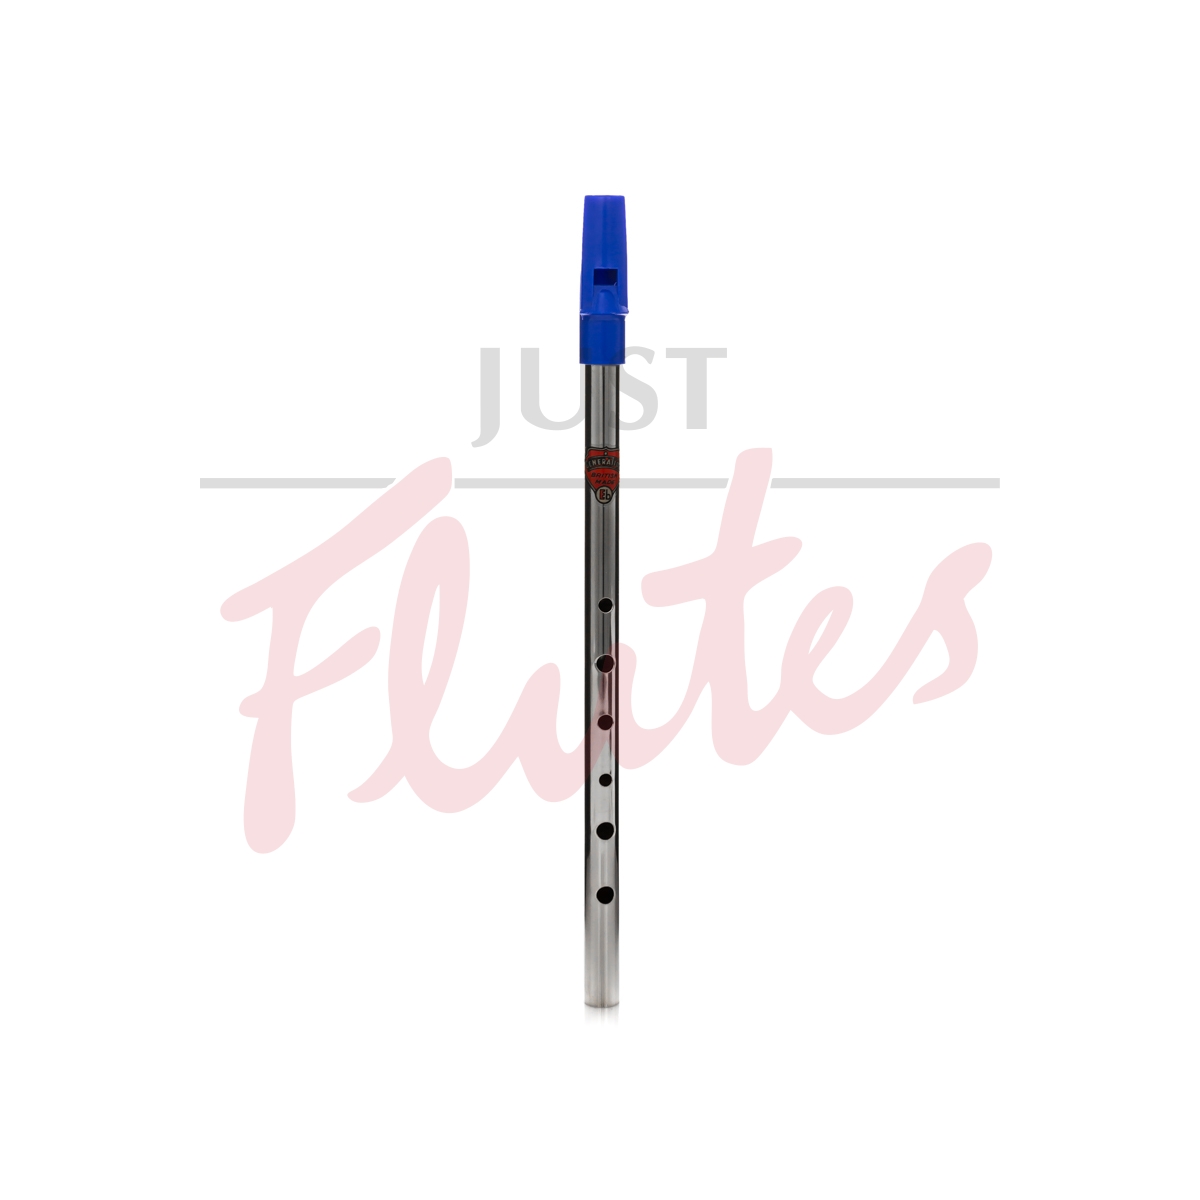 Generation Nickel Tin Whistle/Flageolet In Eb